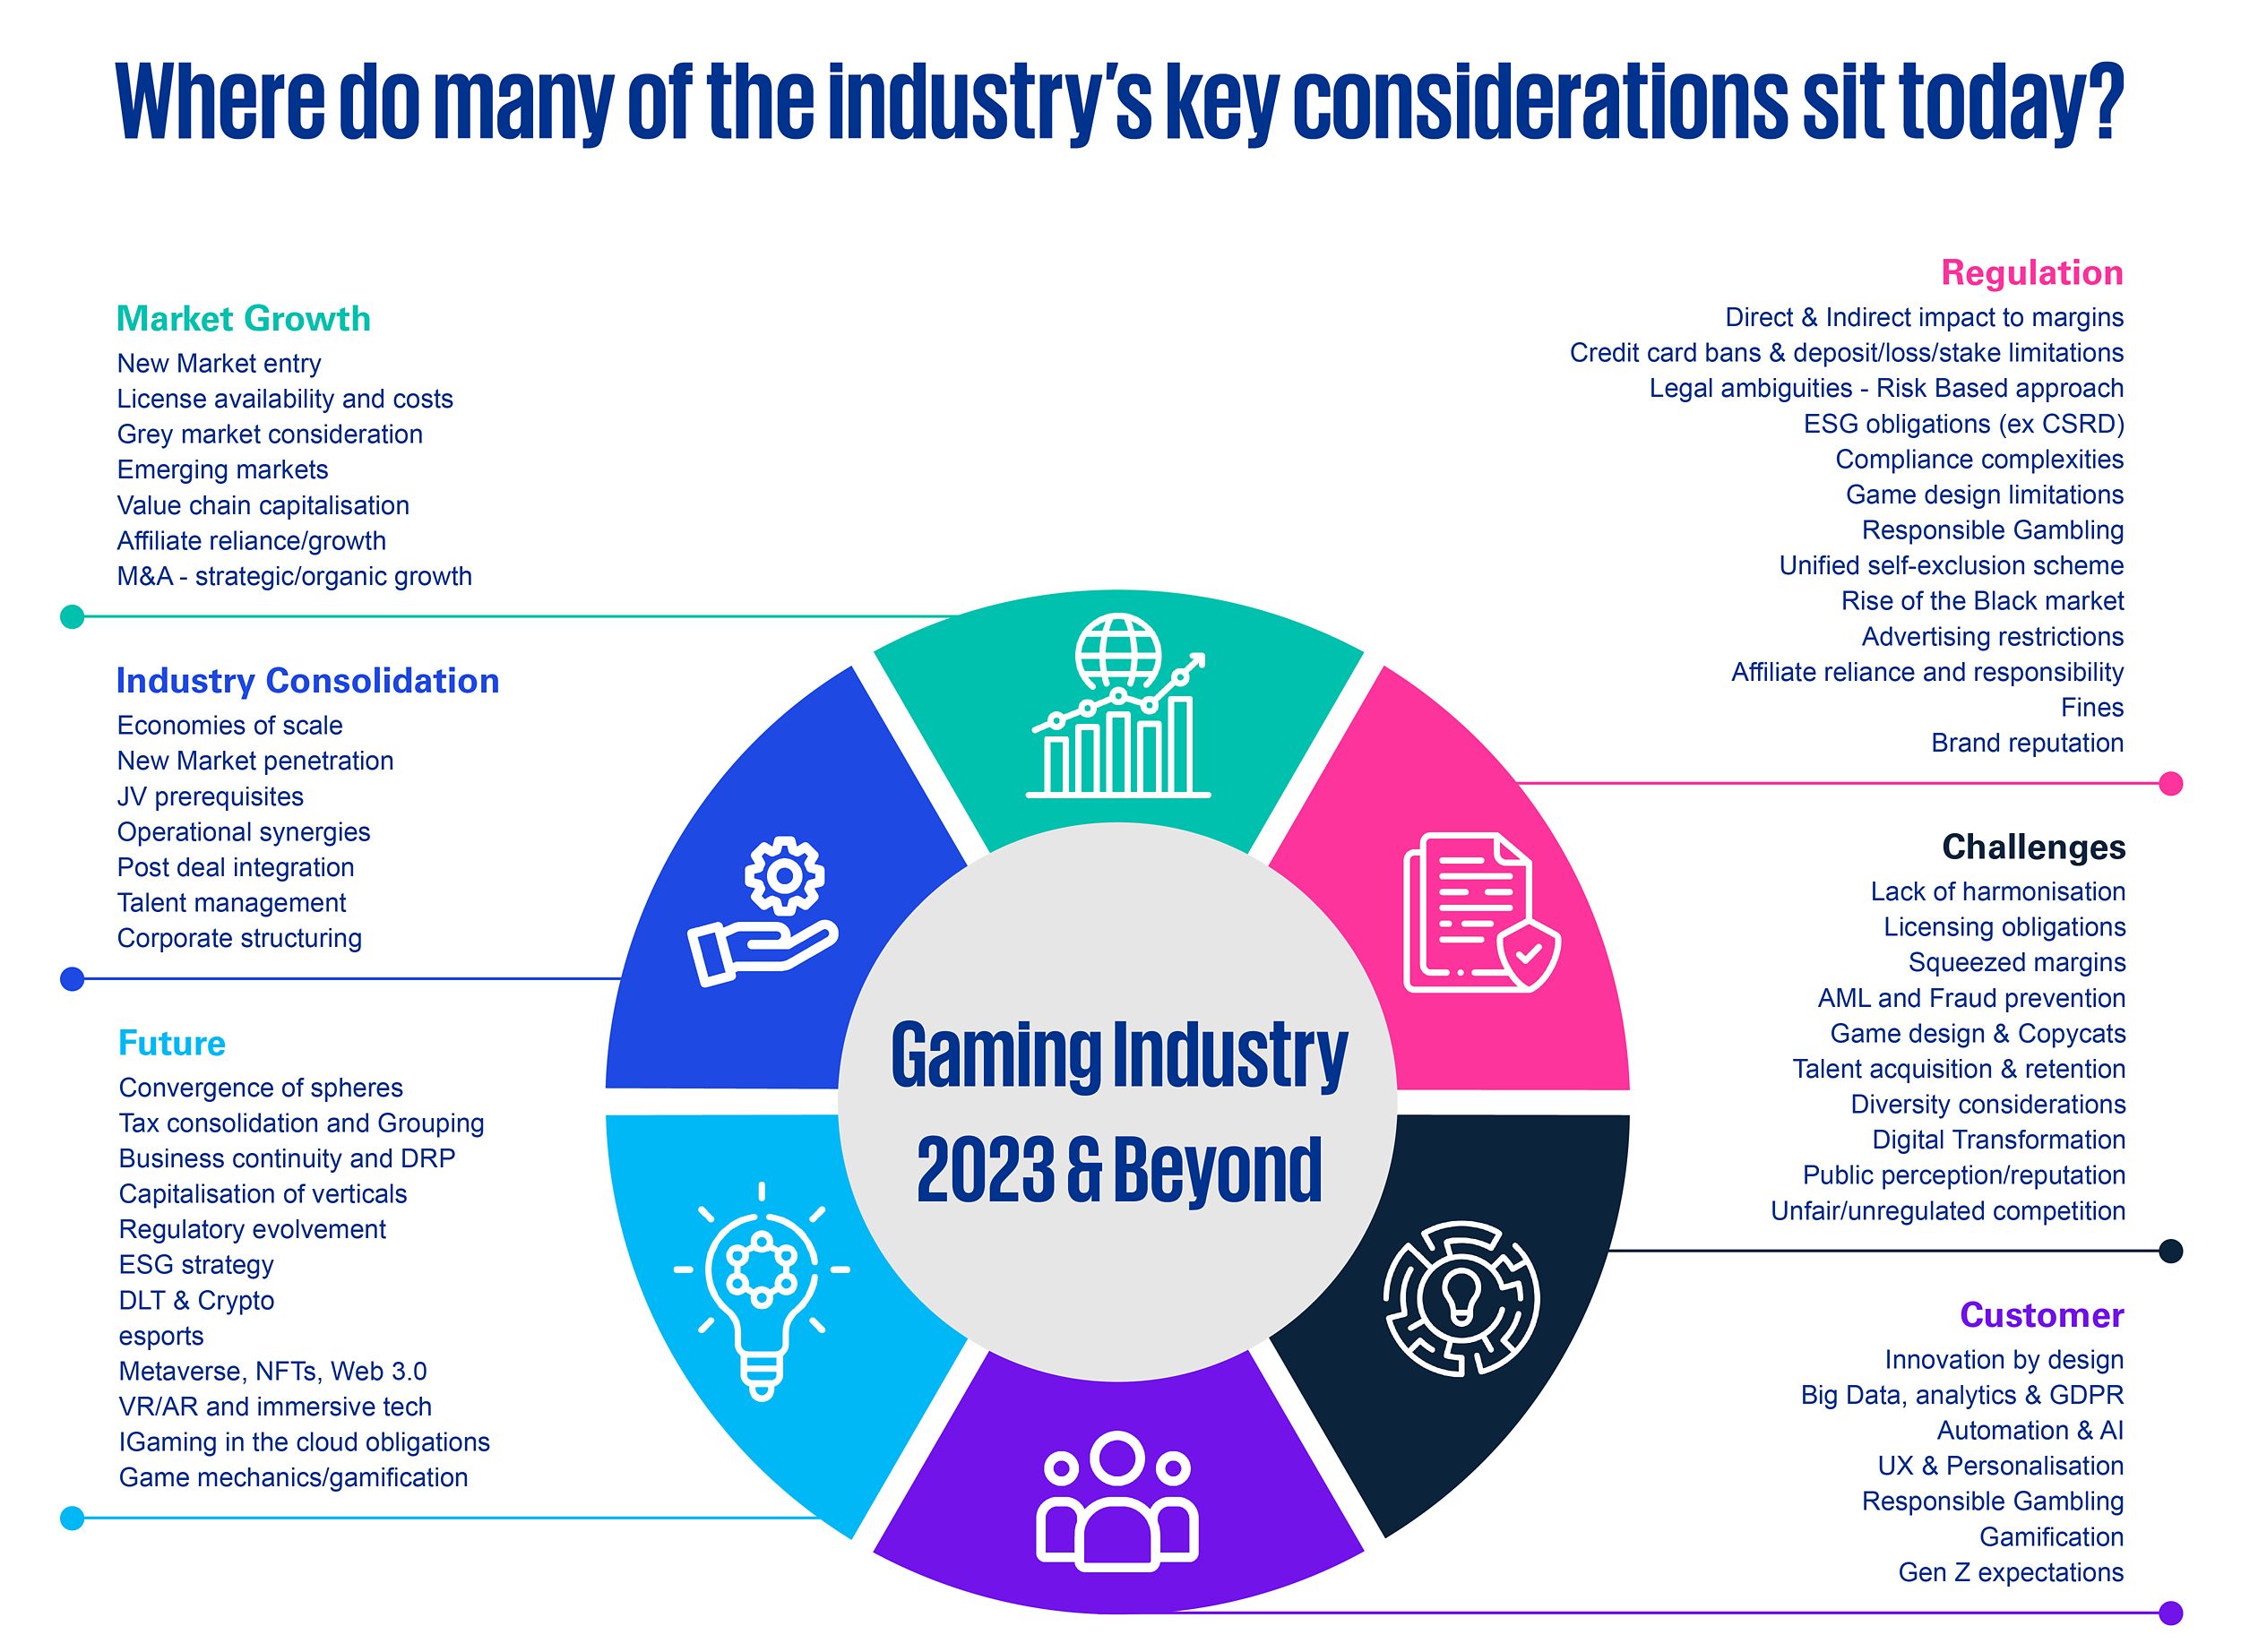 Where do many of the industry's key considerations sit today?